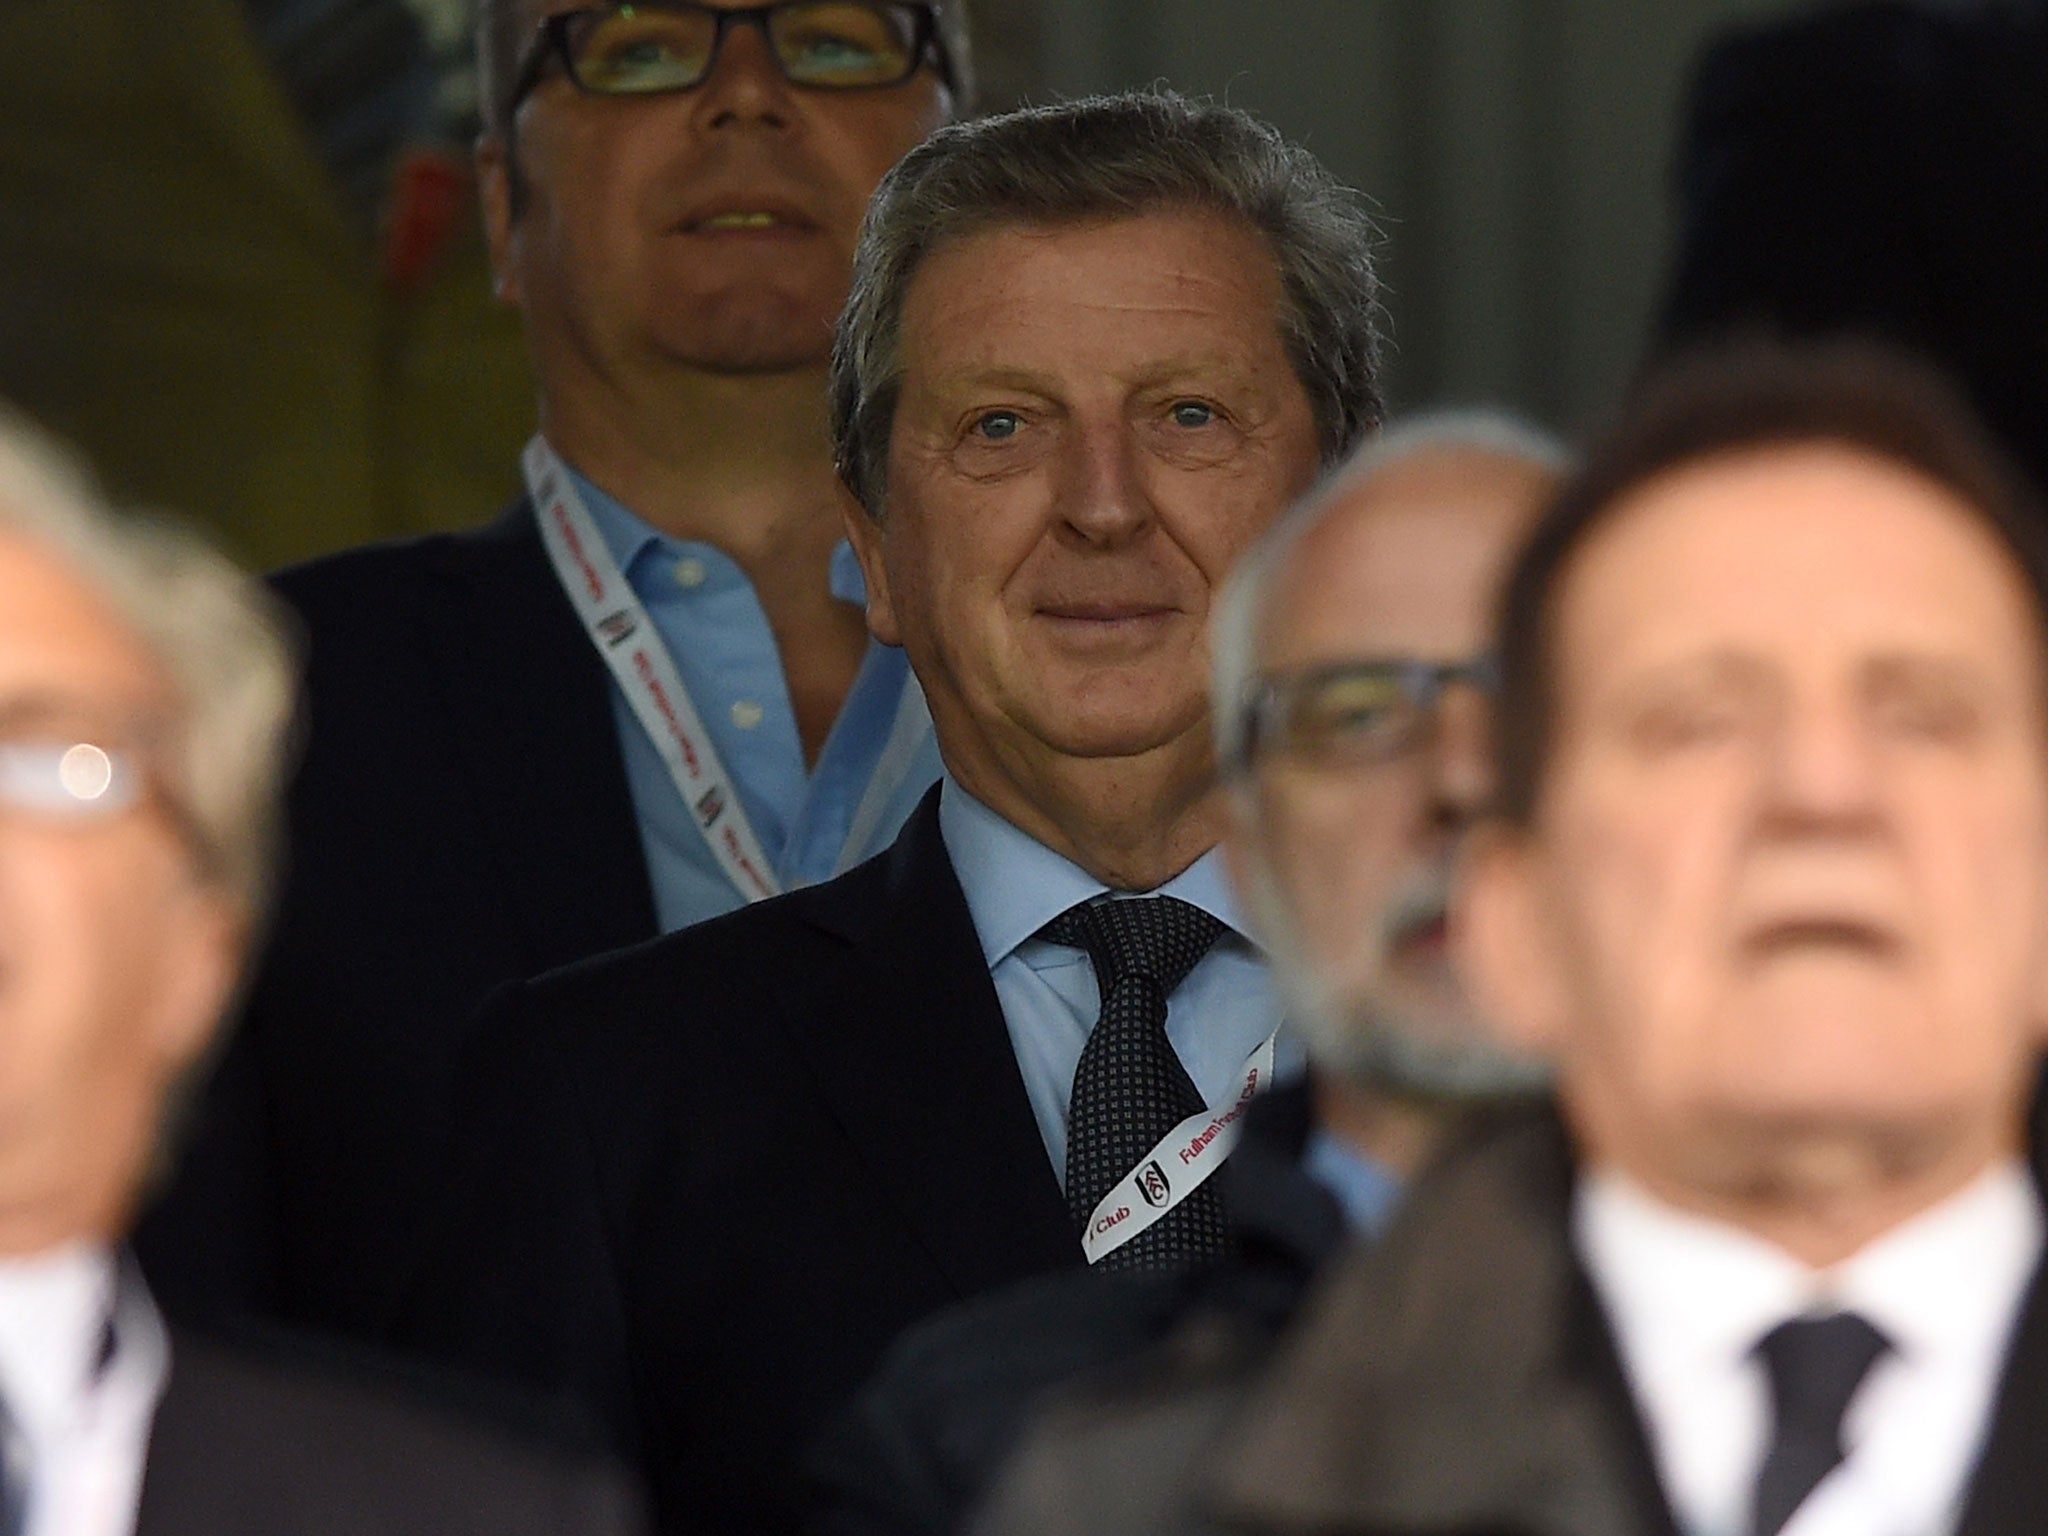 Roy Hodgson attends the International Friendly match between Italy and Ireland at Craven Cottage